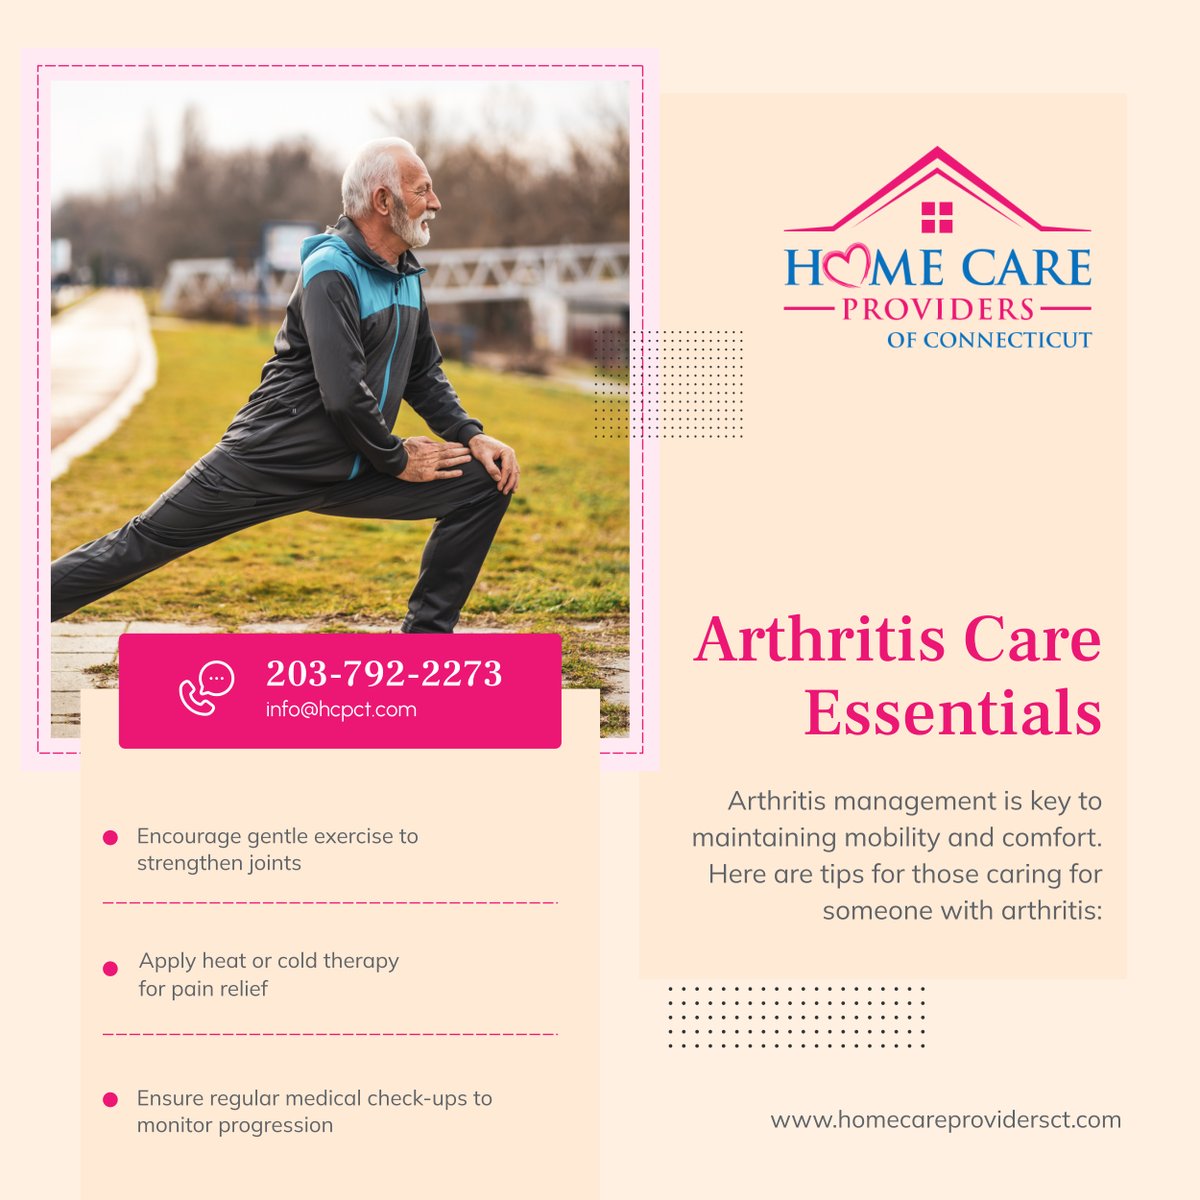 Living with arthritis doesn't have to be about limitations. Exercise, temperature therapy, and ongoing medical advice can transform daily life. 

#BethelCT #HomeCare #ArthritisCare #PainManagement #JointHealth